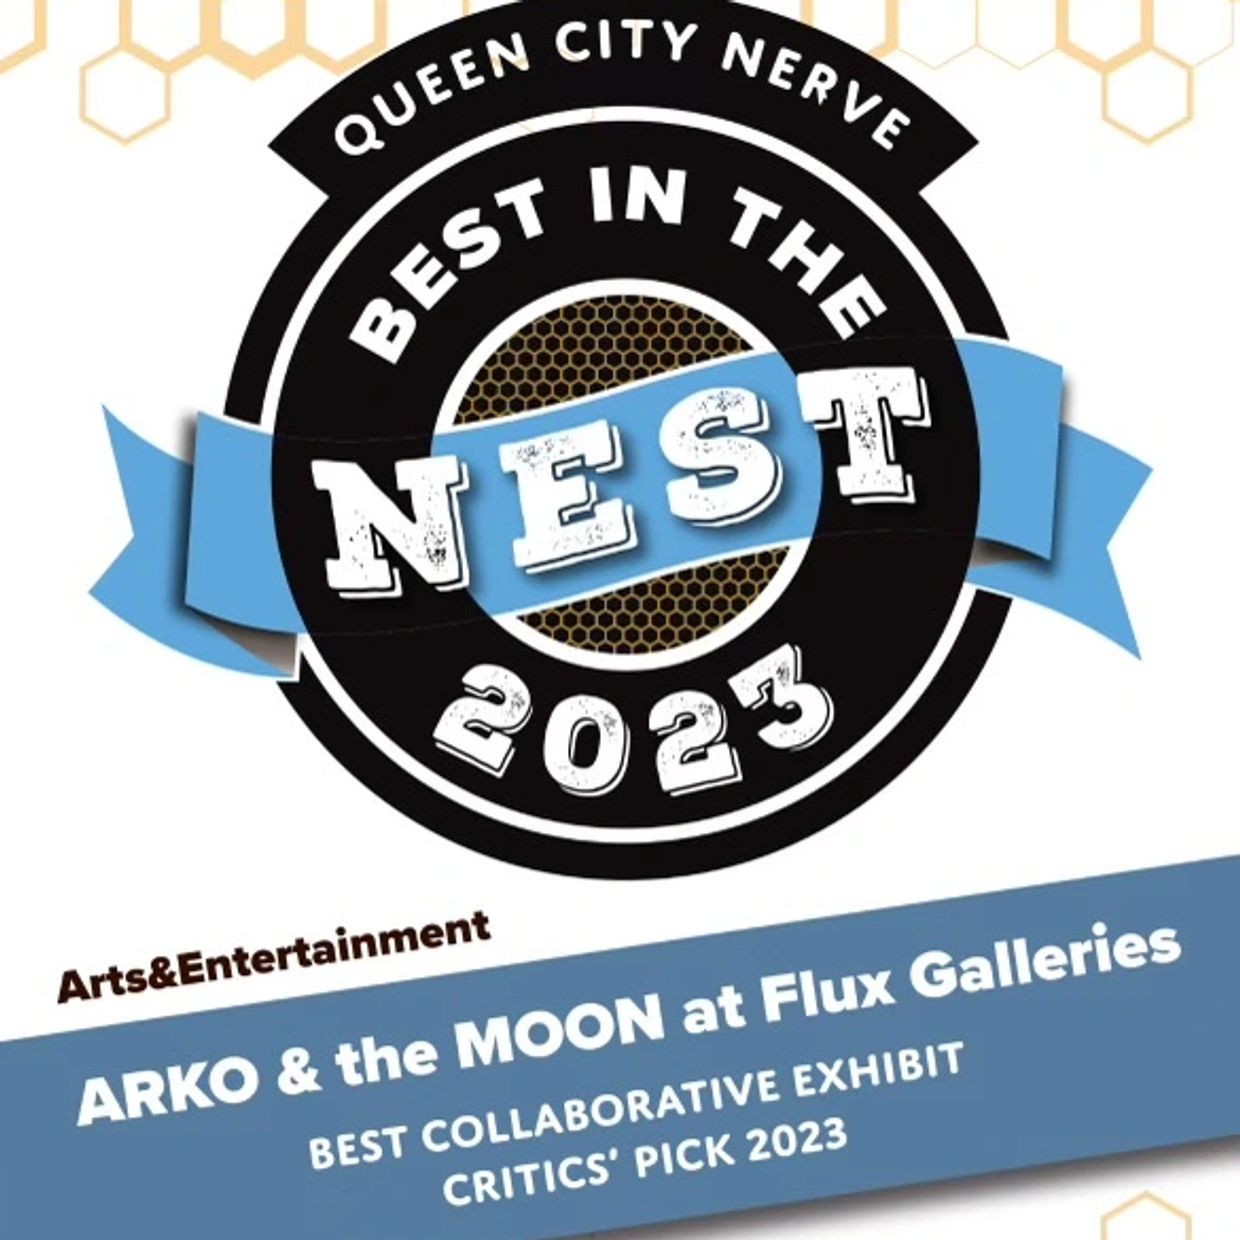 Thank you to QC Nerve for voting ARKO & the Moon Best In The Nest !!